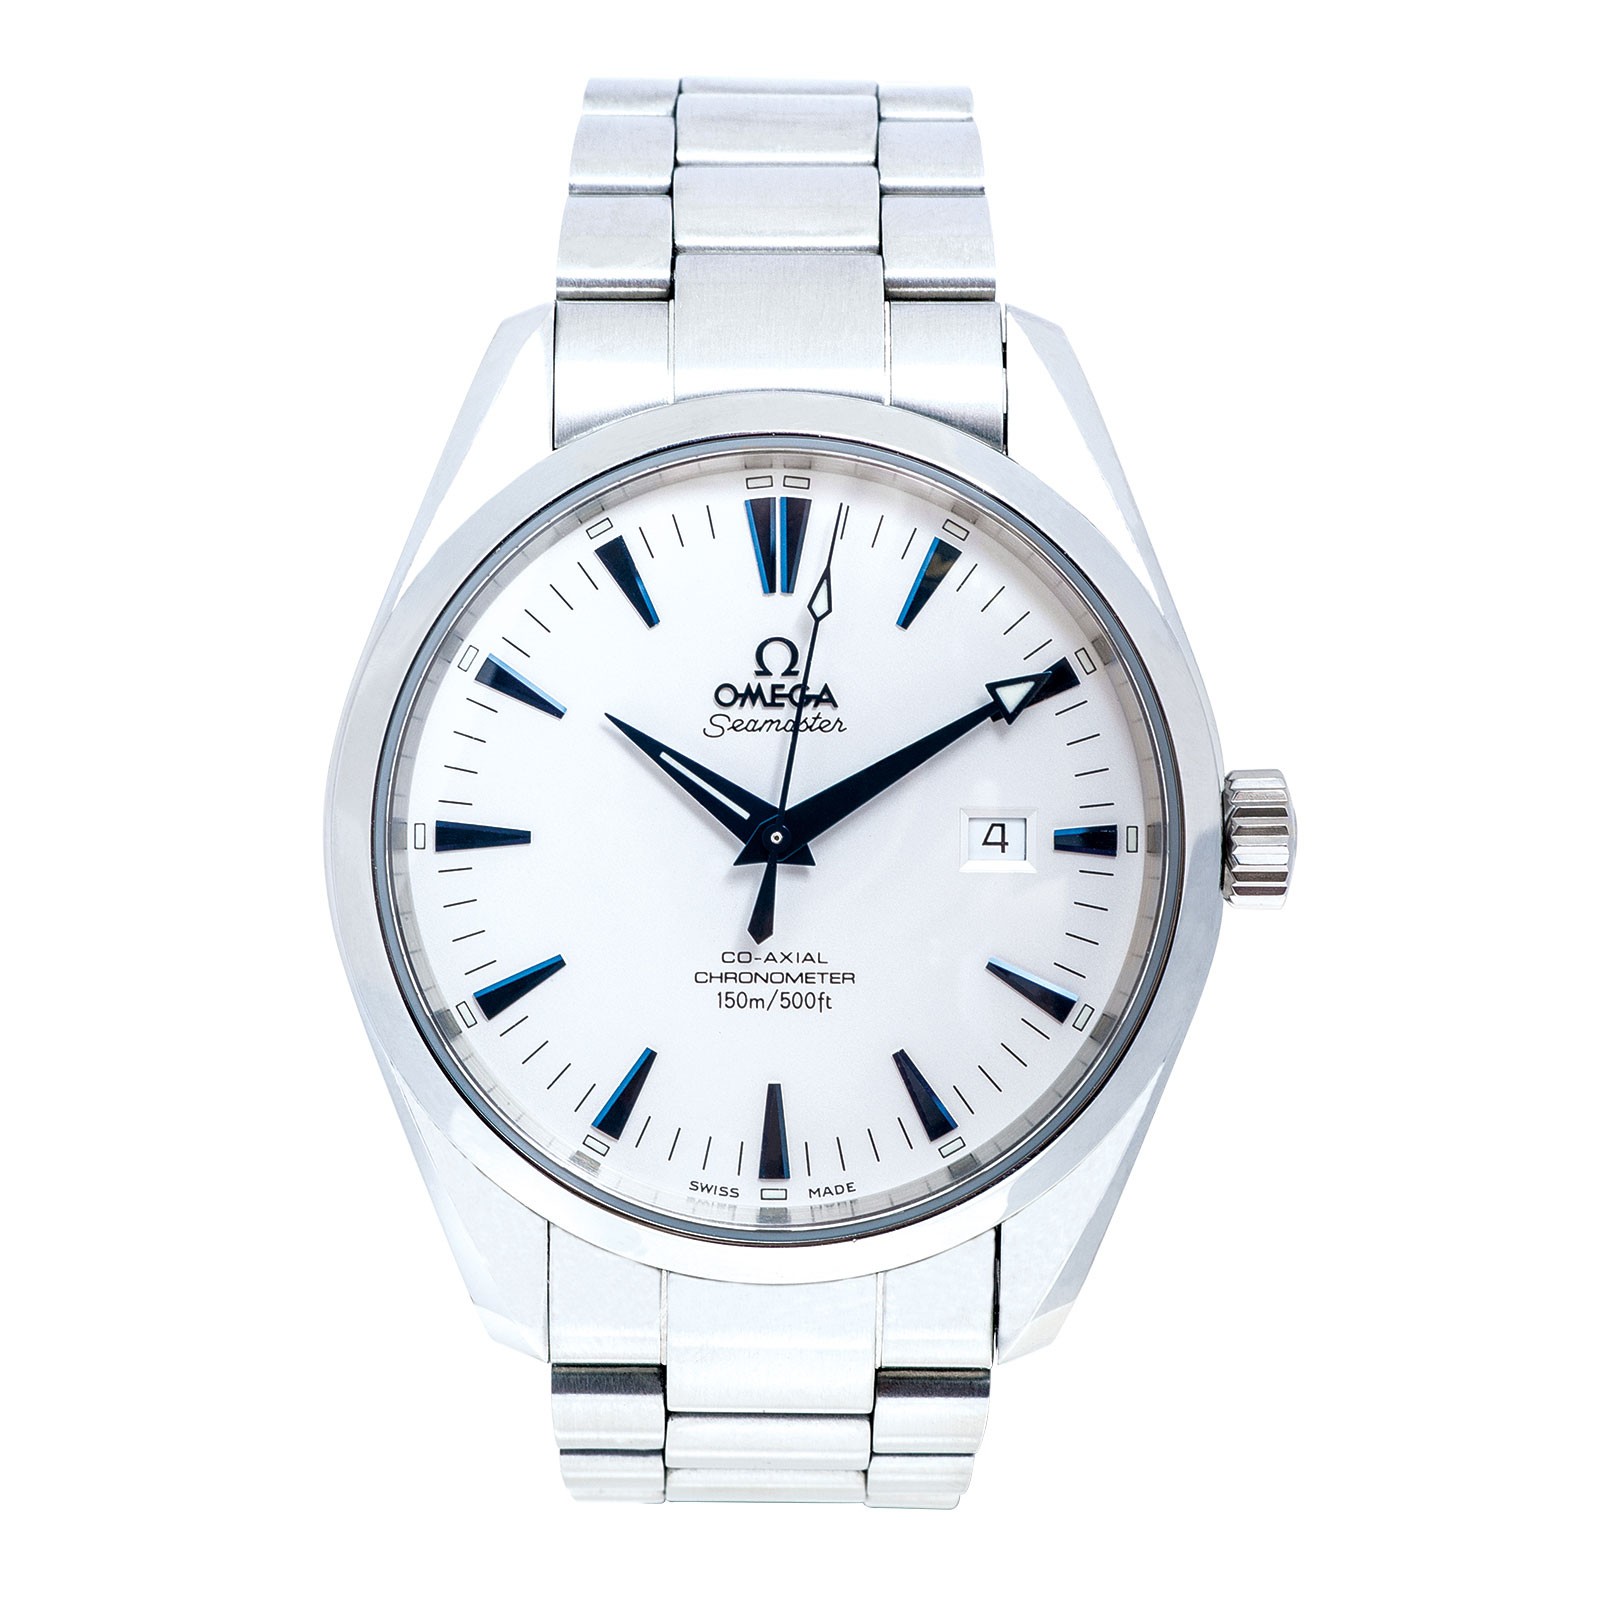 Pre-owned Omega Seamaster in stainless steel with a white dial.